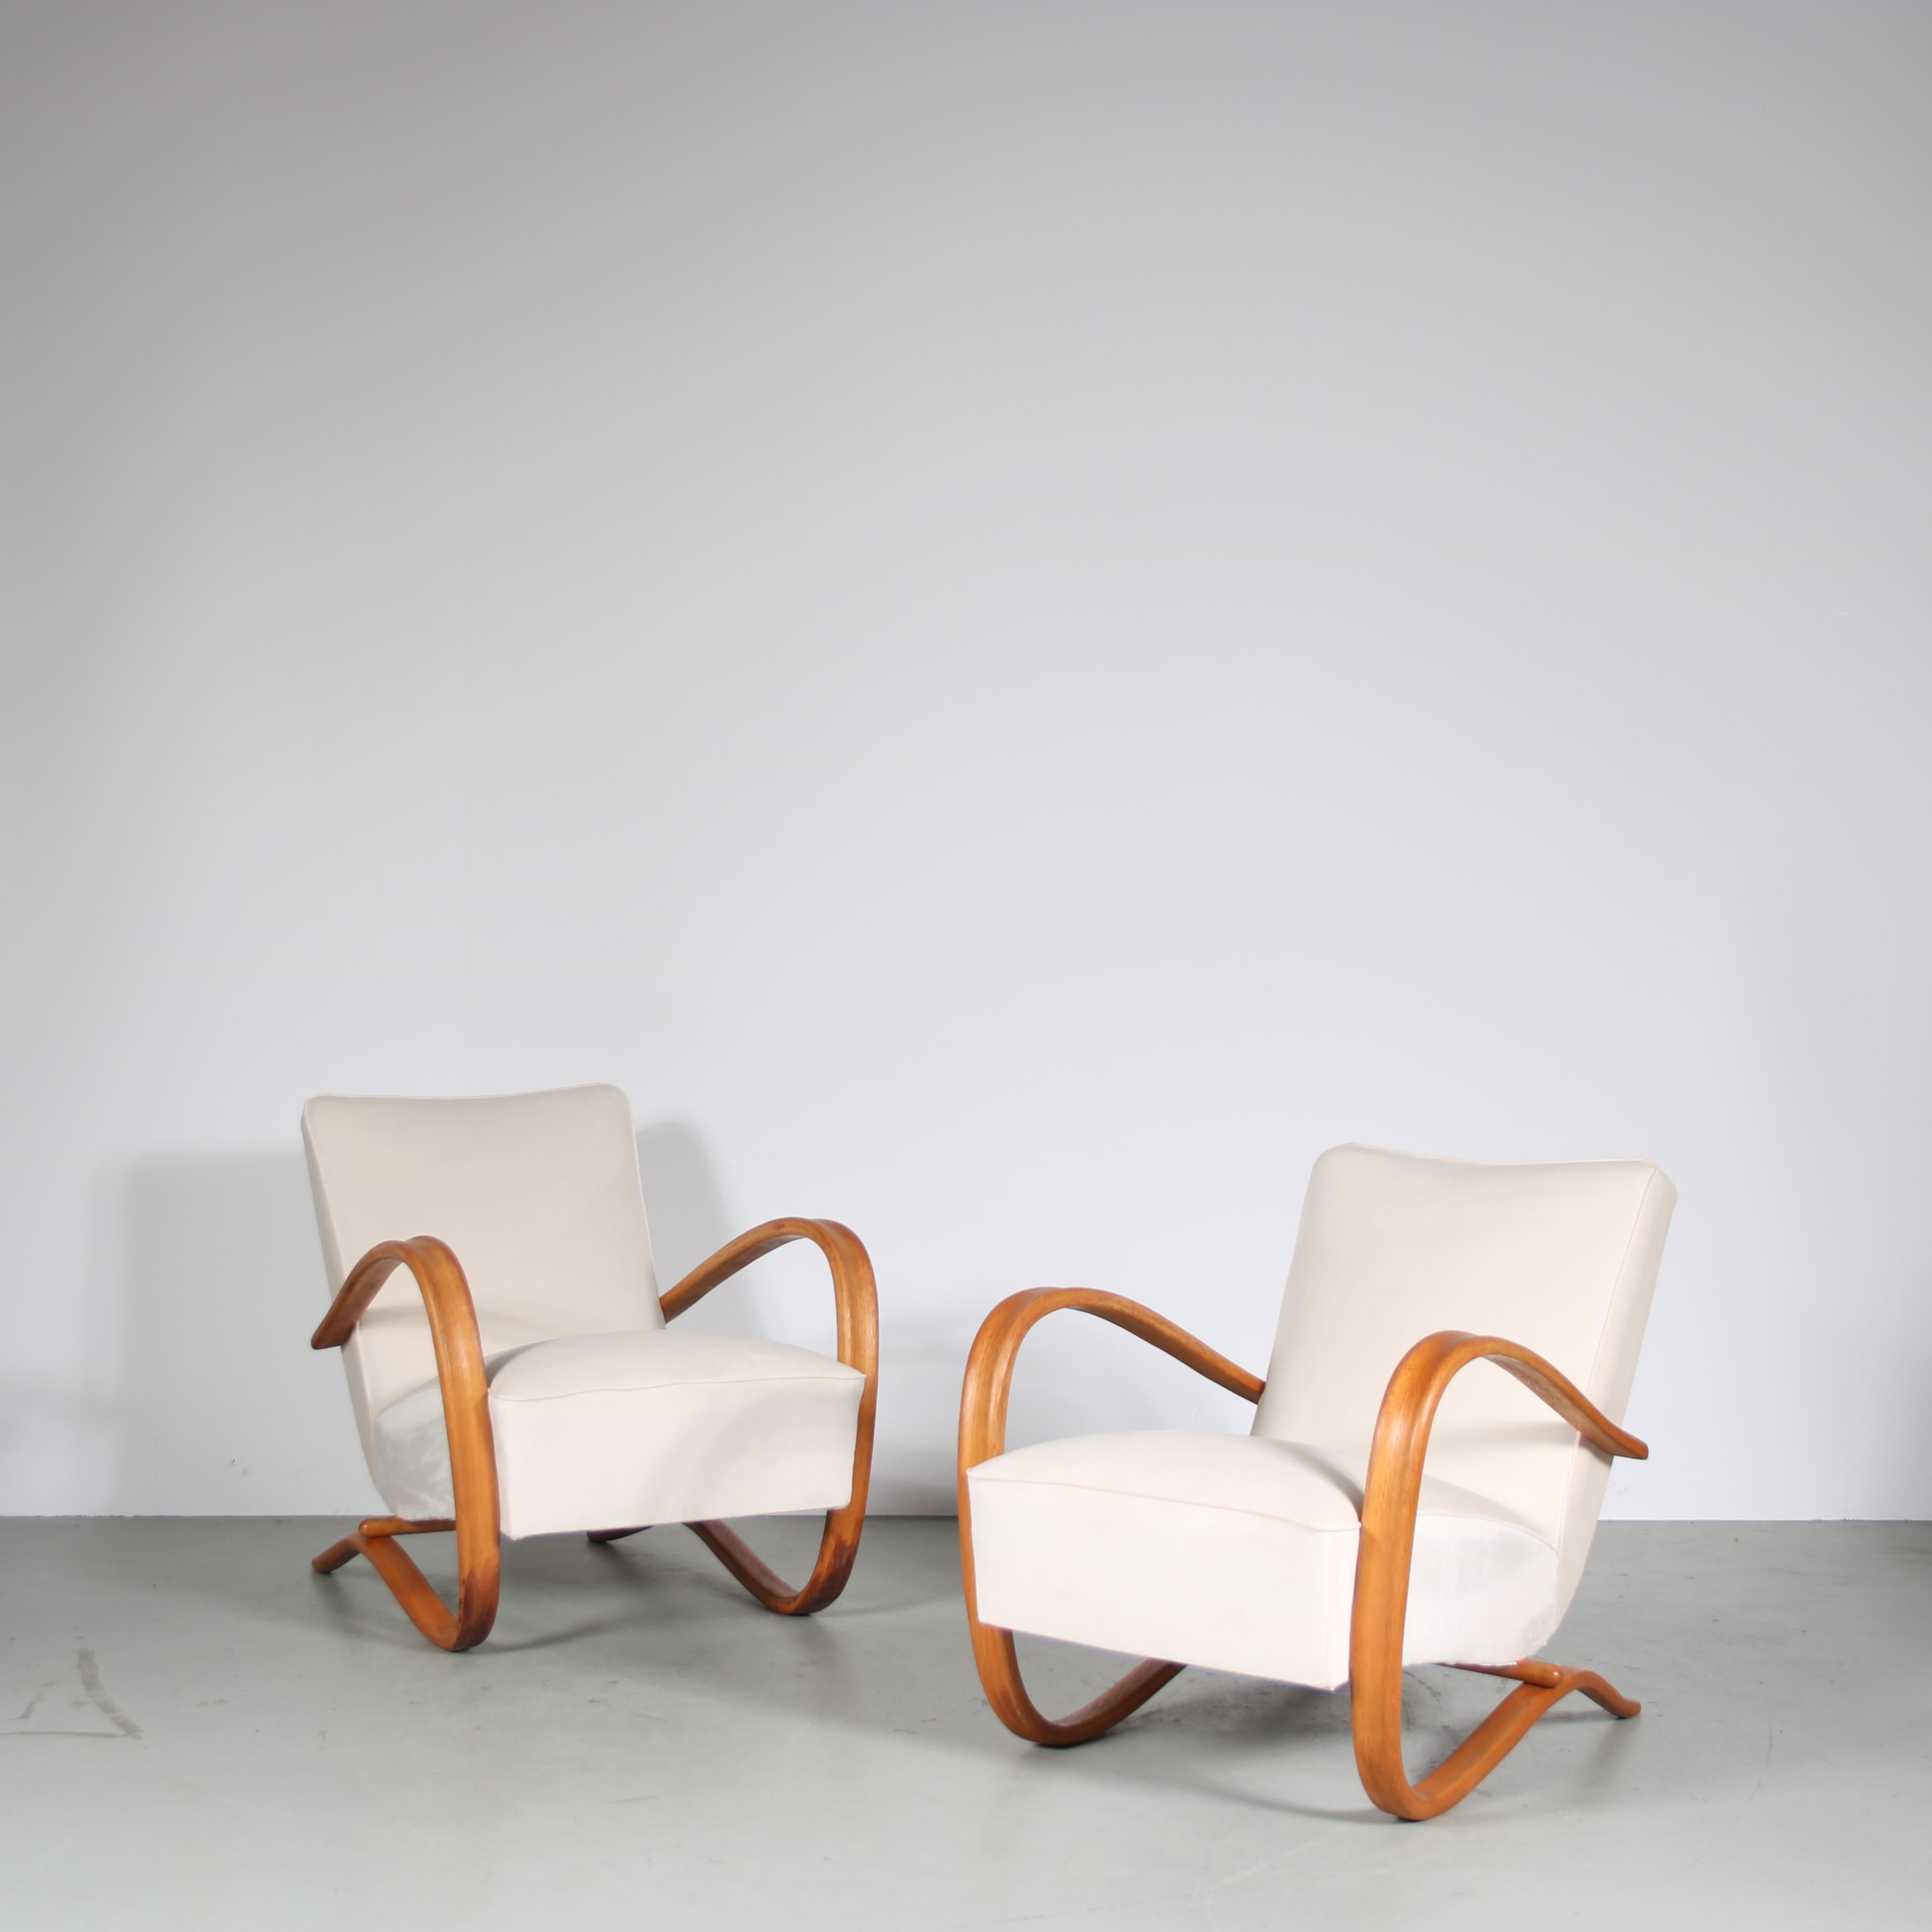 An iconic pair of lounge chairs in eye-catching Czech design by Jindrich Halabala, manufactured by Up Zavody in the Czech Republic around 1930.

These chairs have a beautiful art deco style. The light wooden curved armrests transition smoothly into